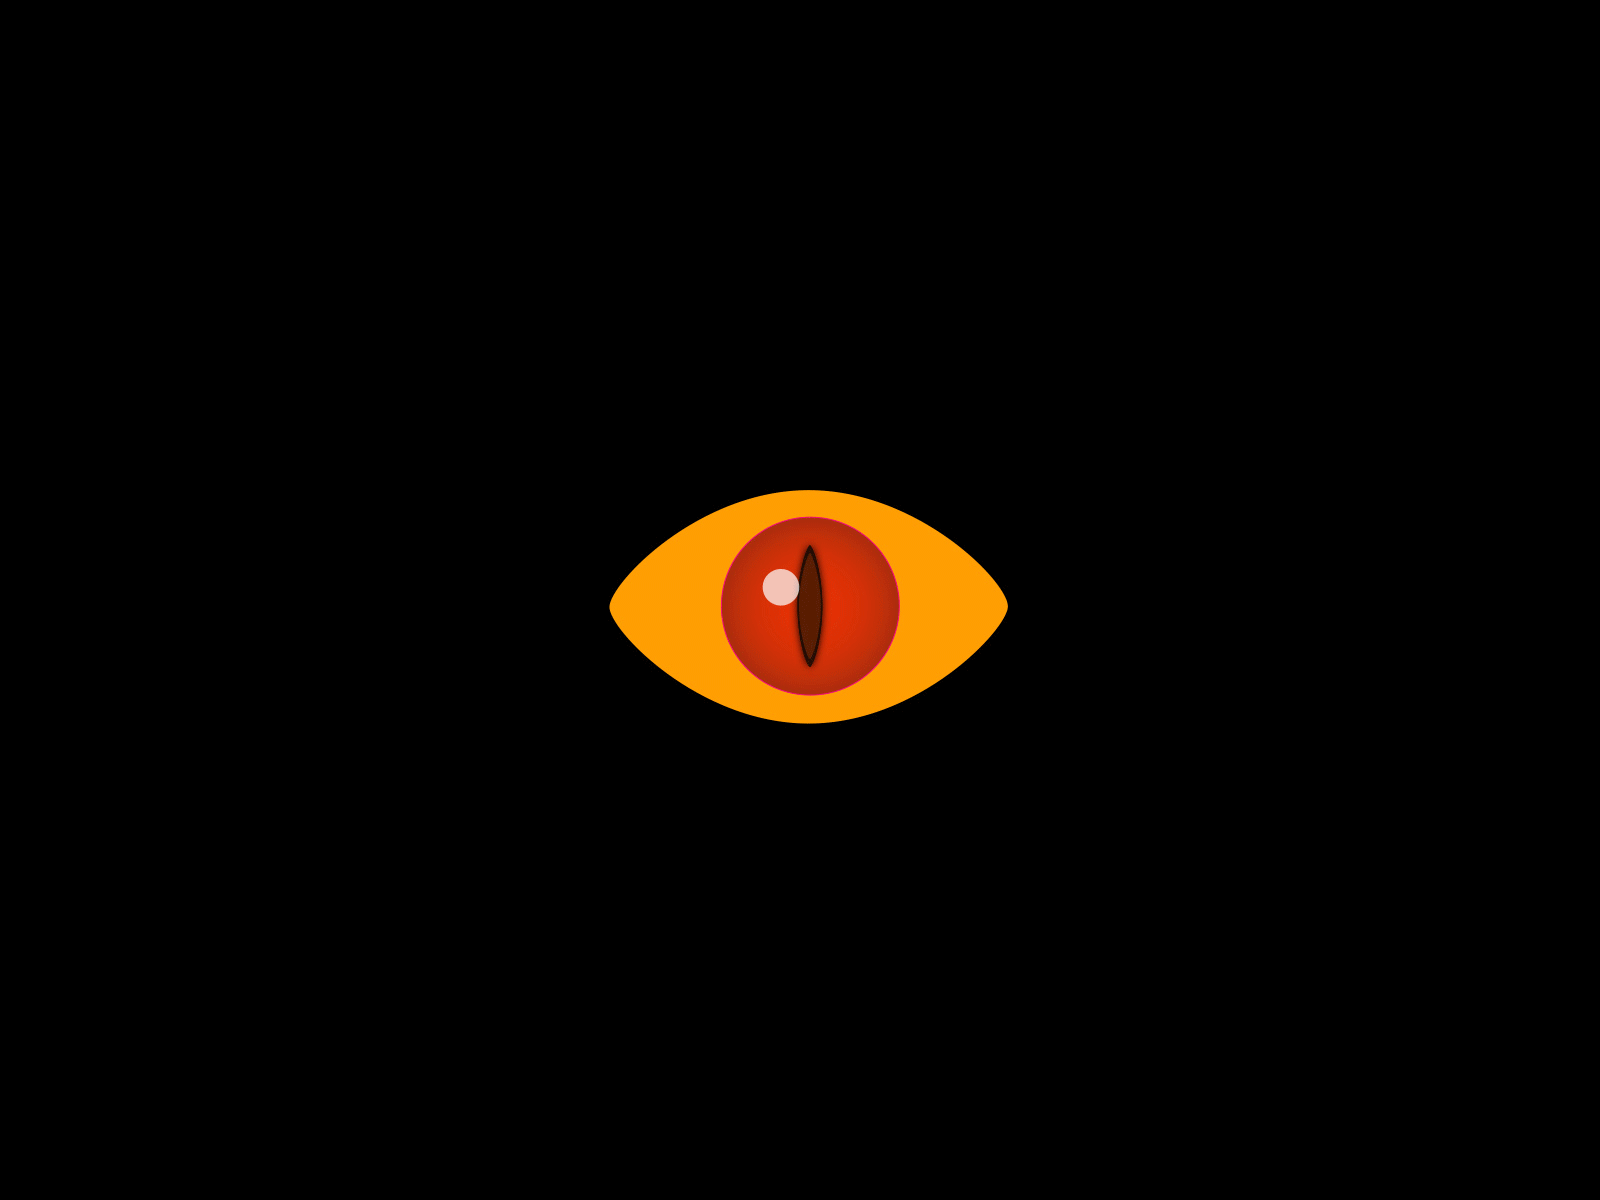 Look into the eye